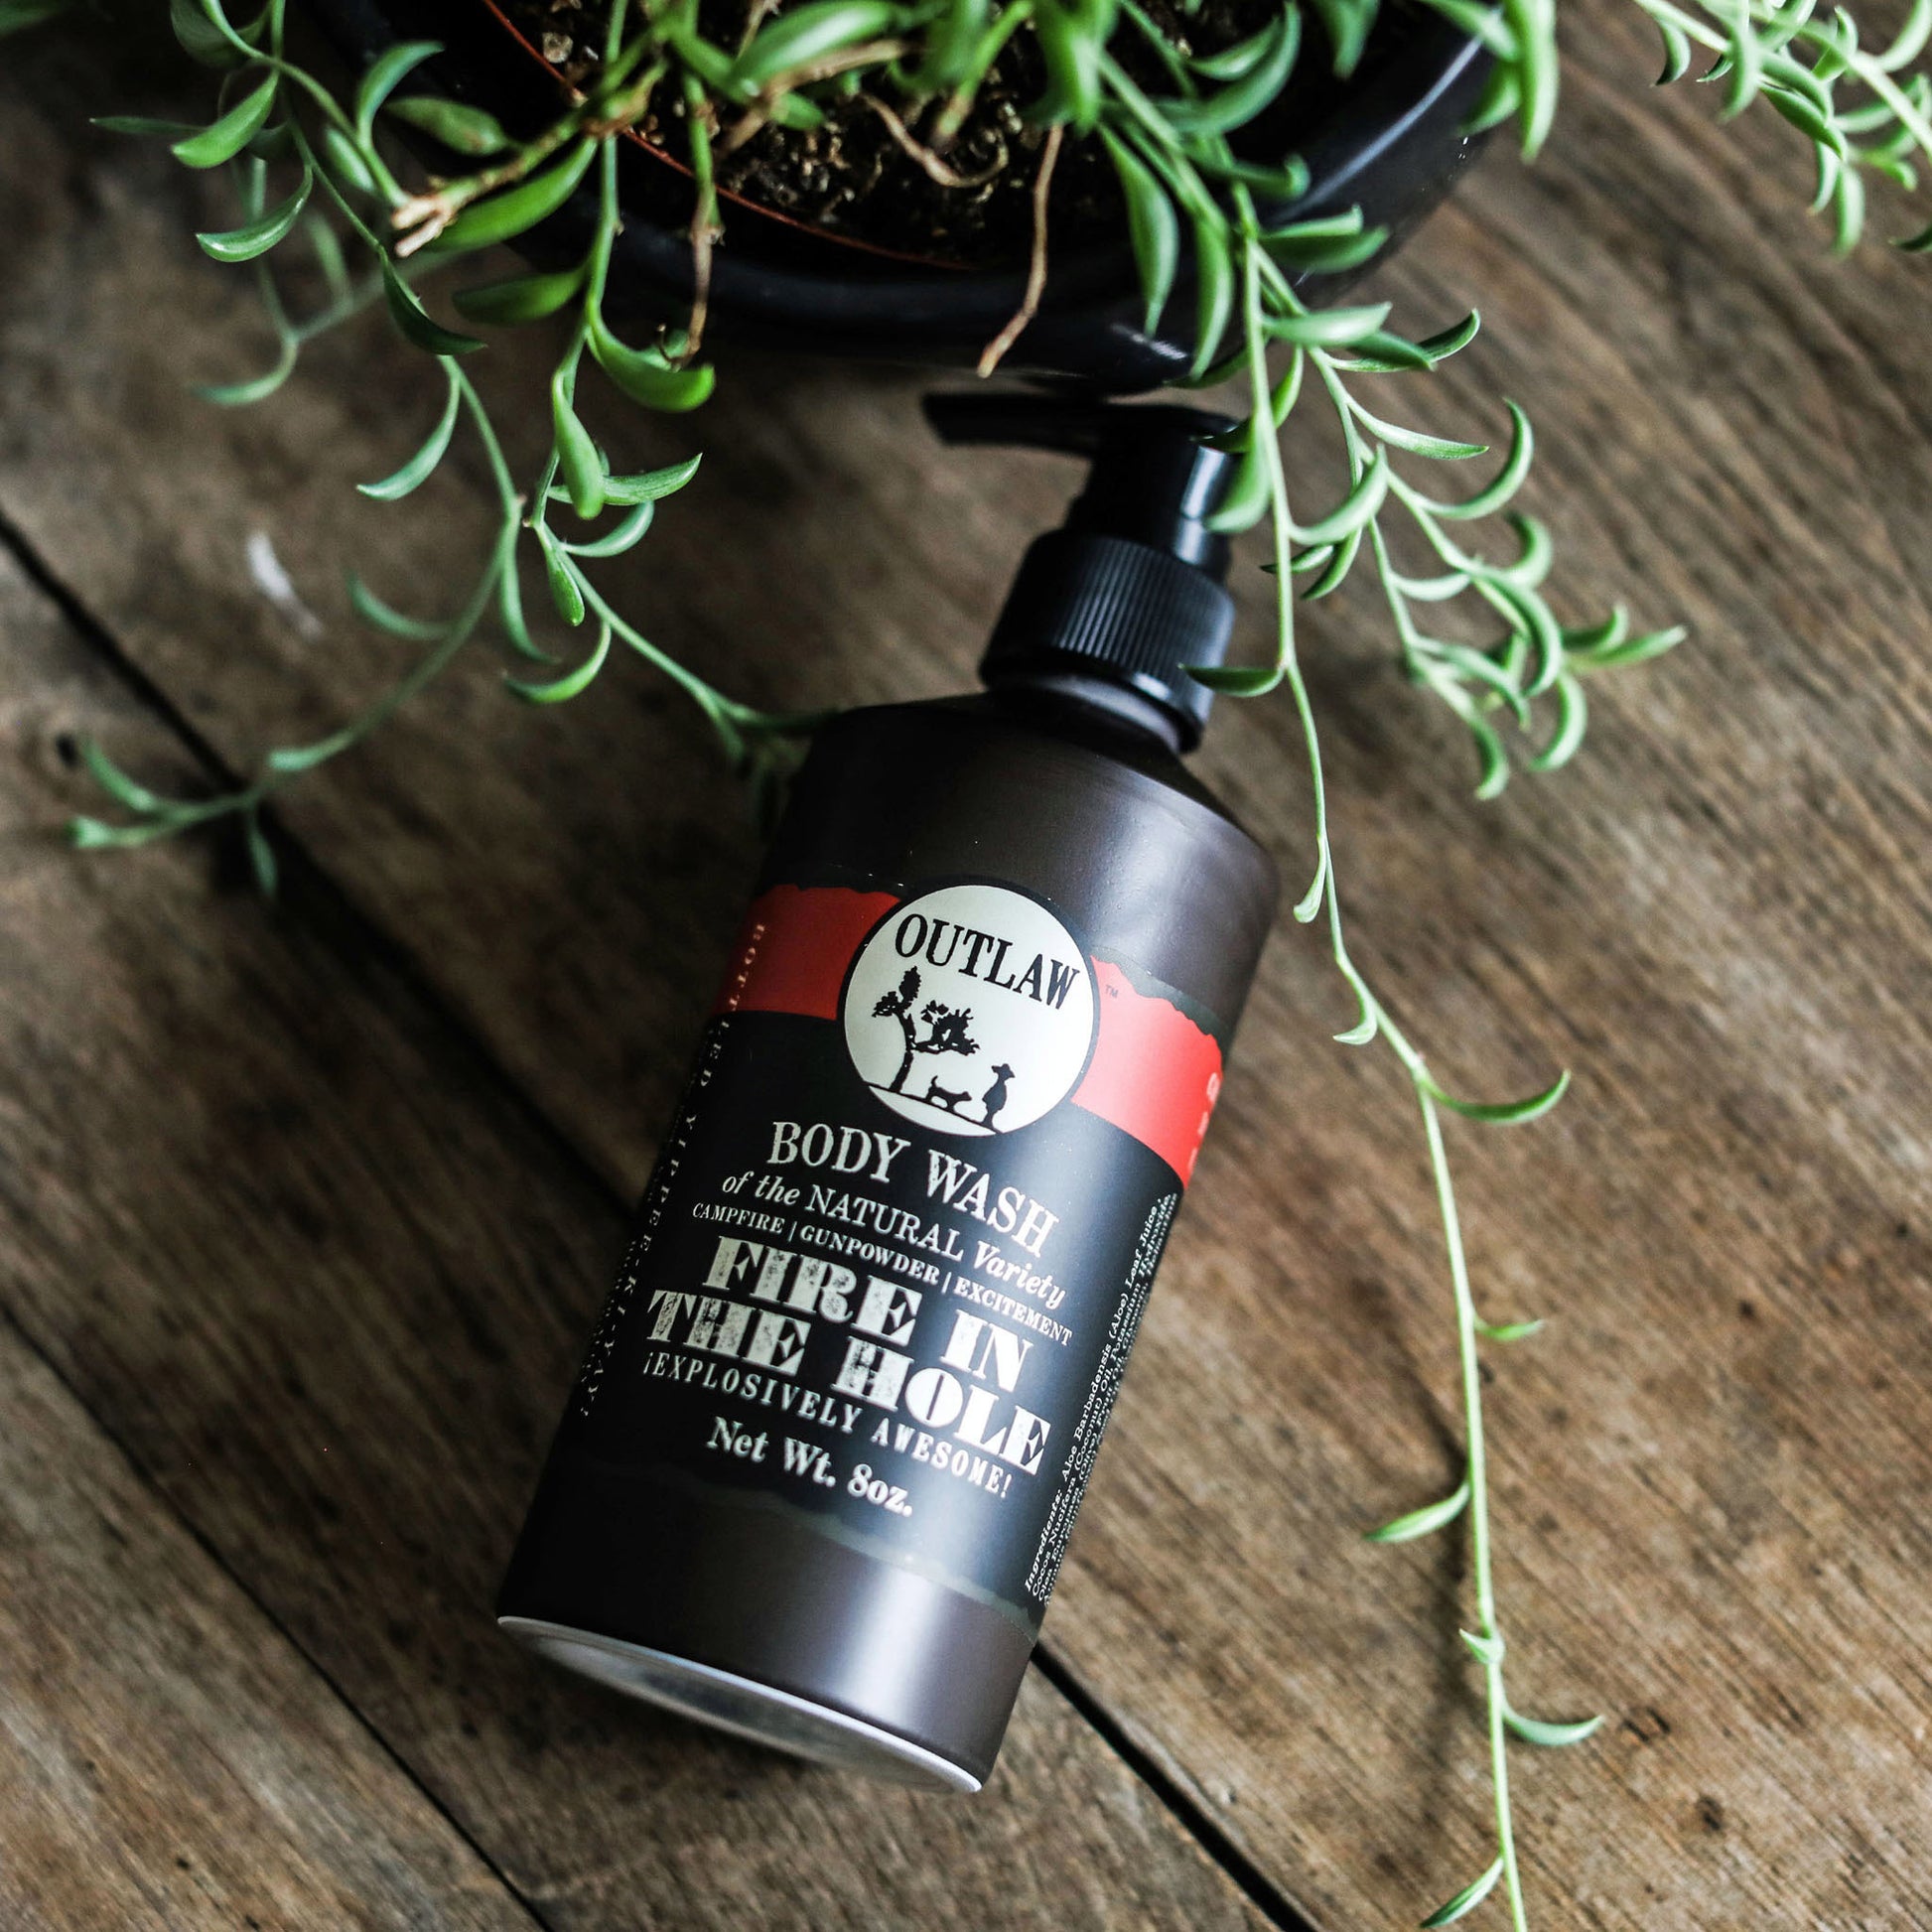 Natural body wash with Fire in the Hole campfire scent by Outlaw